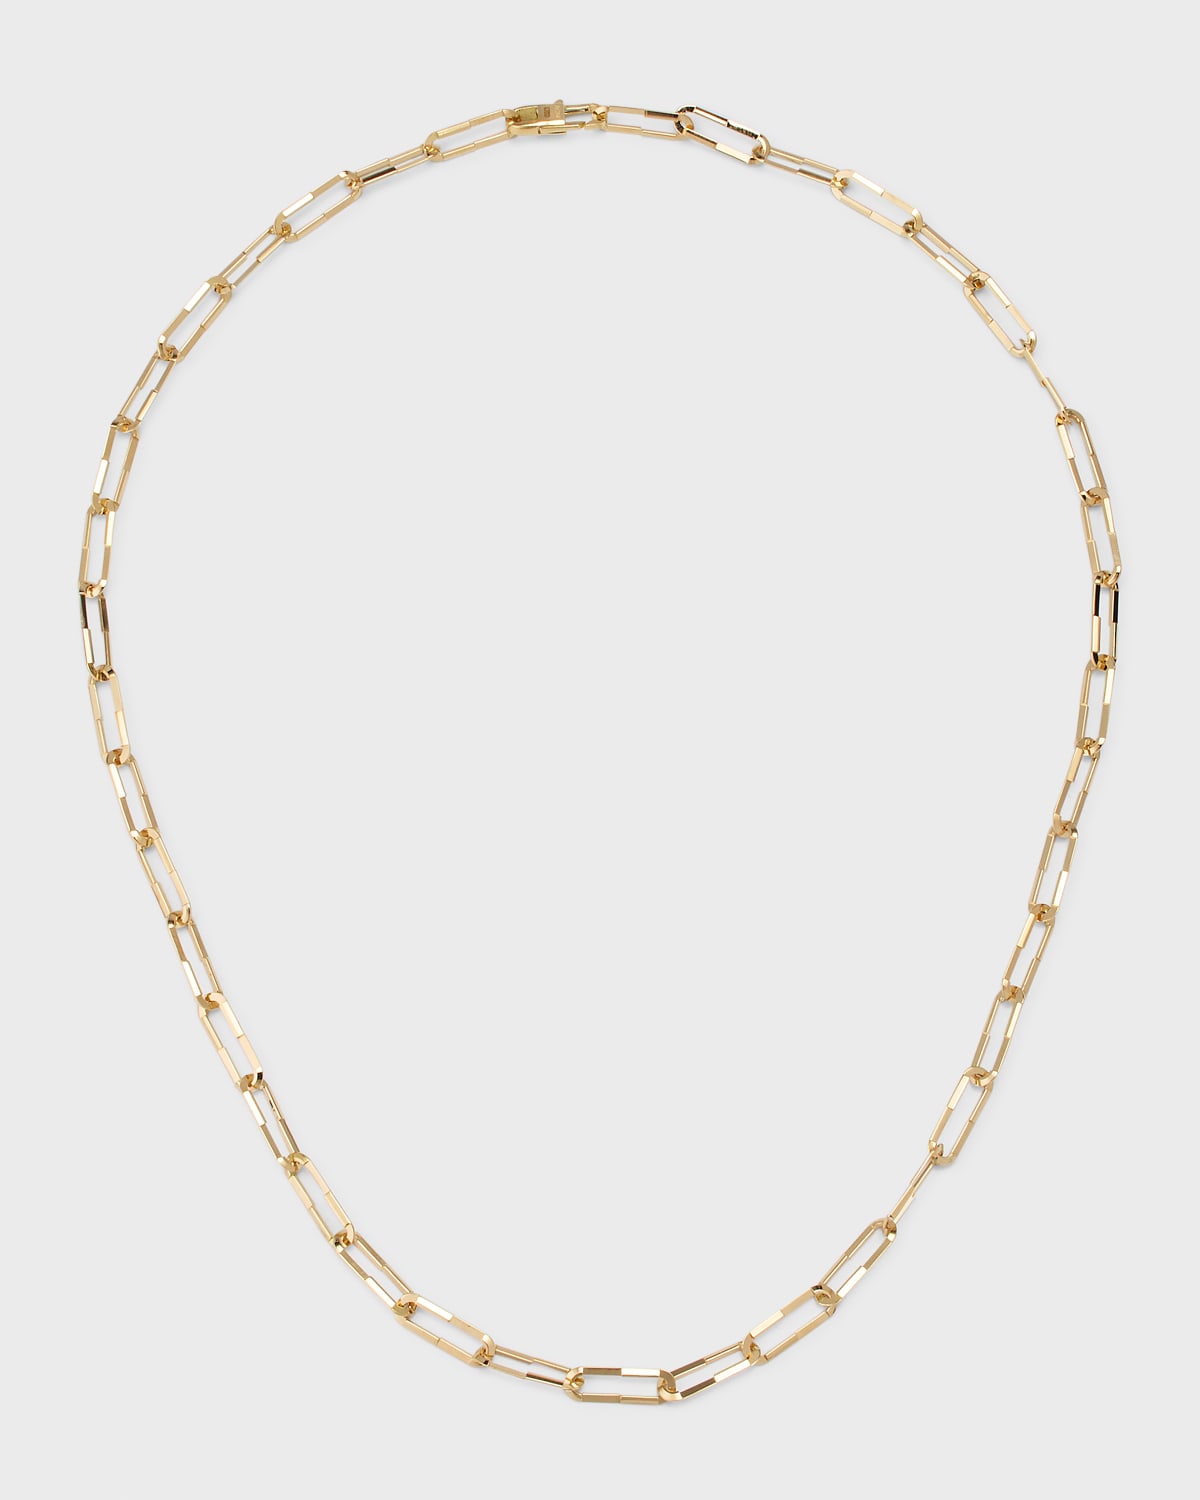 GUCCI LINK TO LOVE NECKLACE IN 18K YELLOW GOLD, 16.5"L